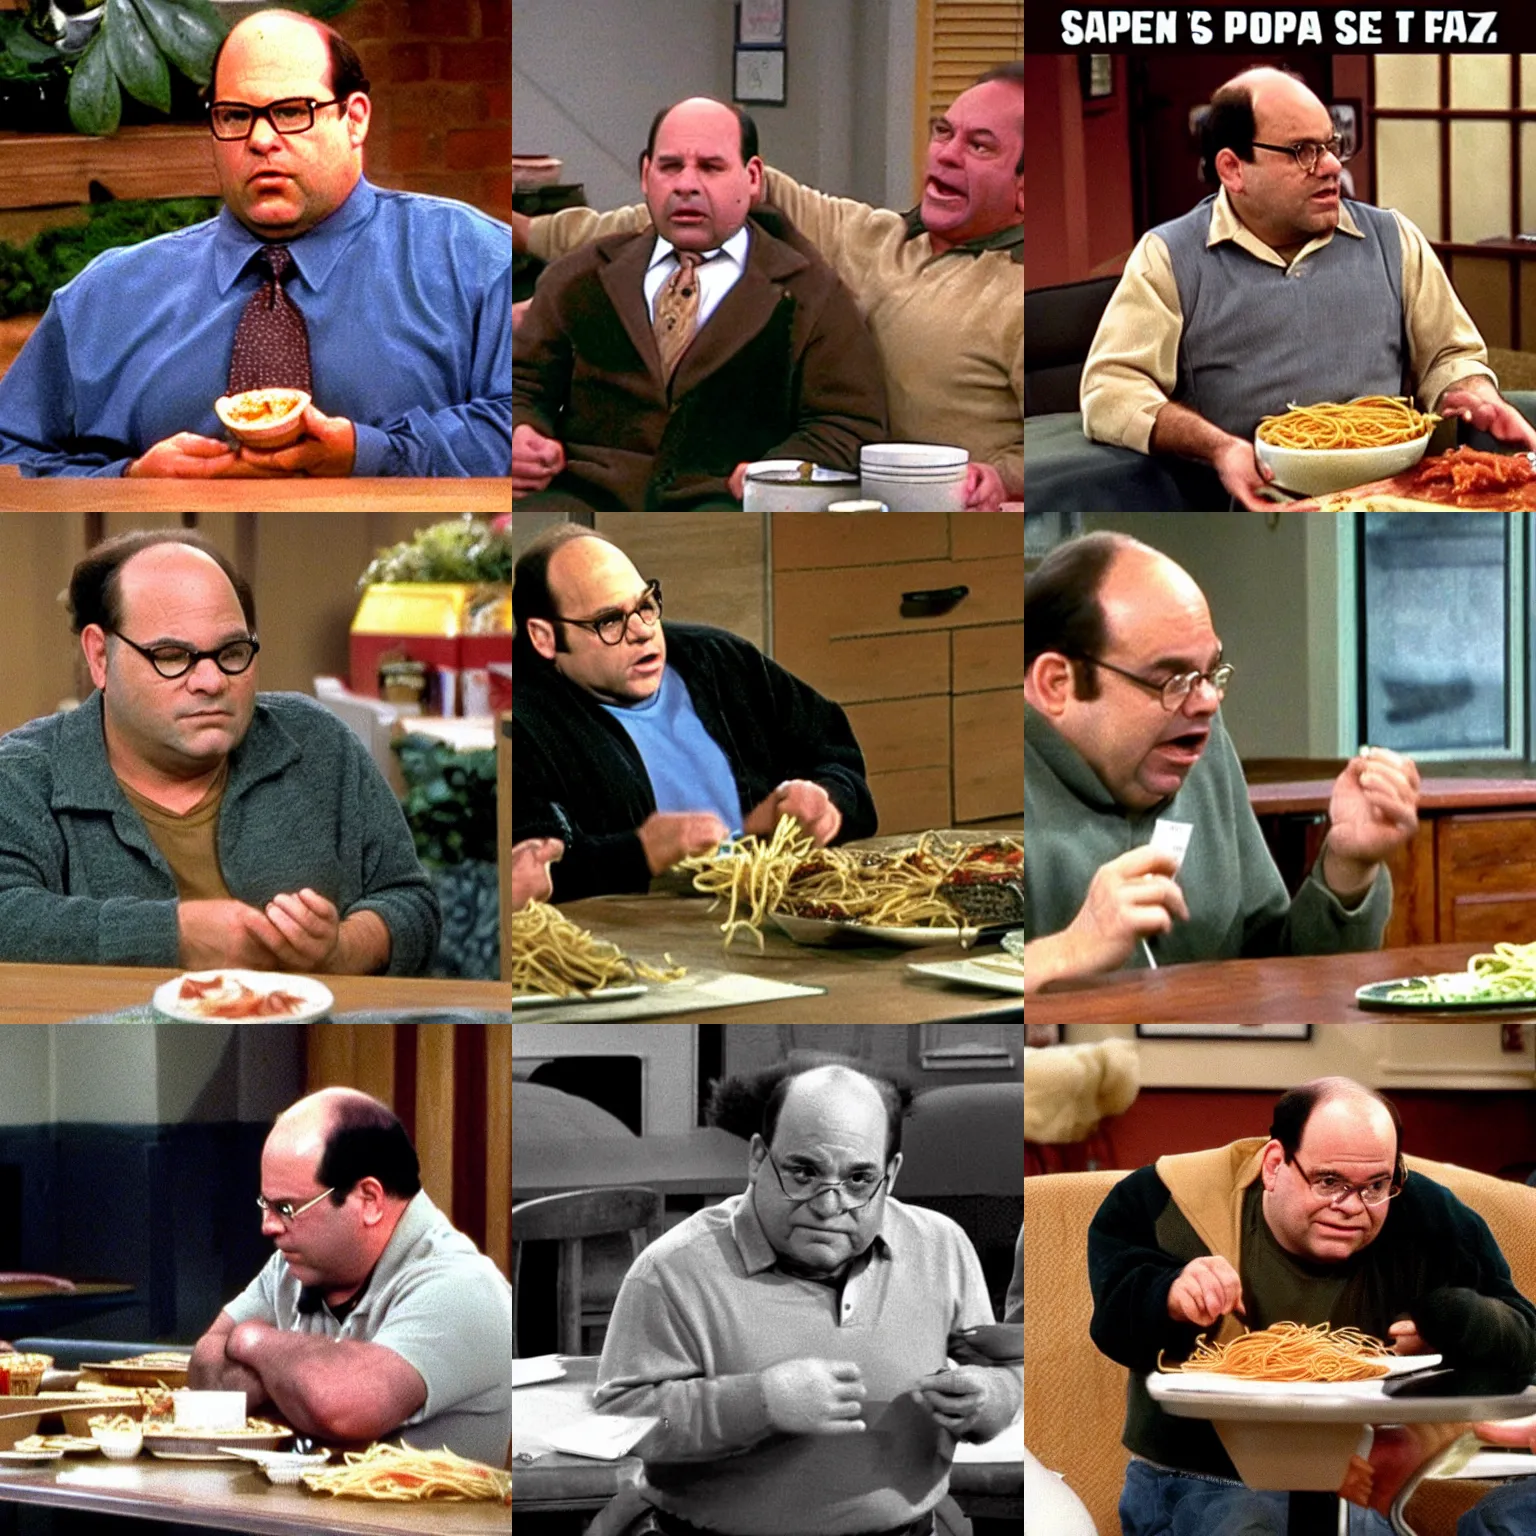 Prompt: George Costanza, upset instead of spaghetti he was served a pack of wolves.